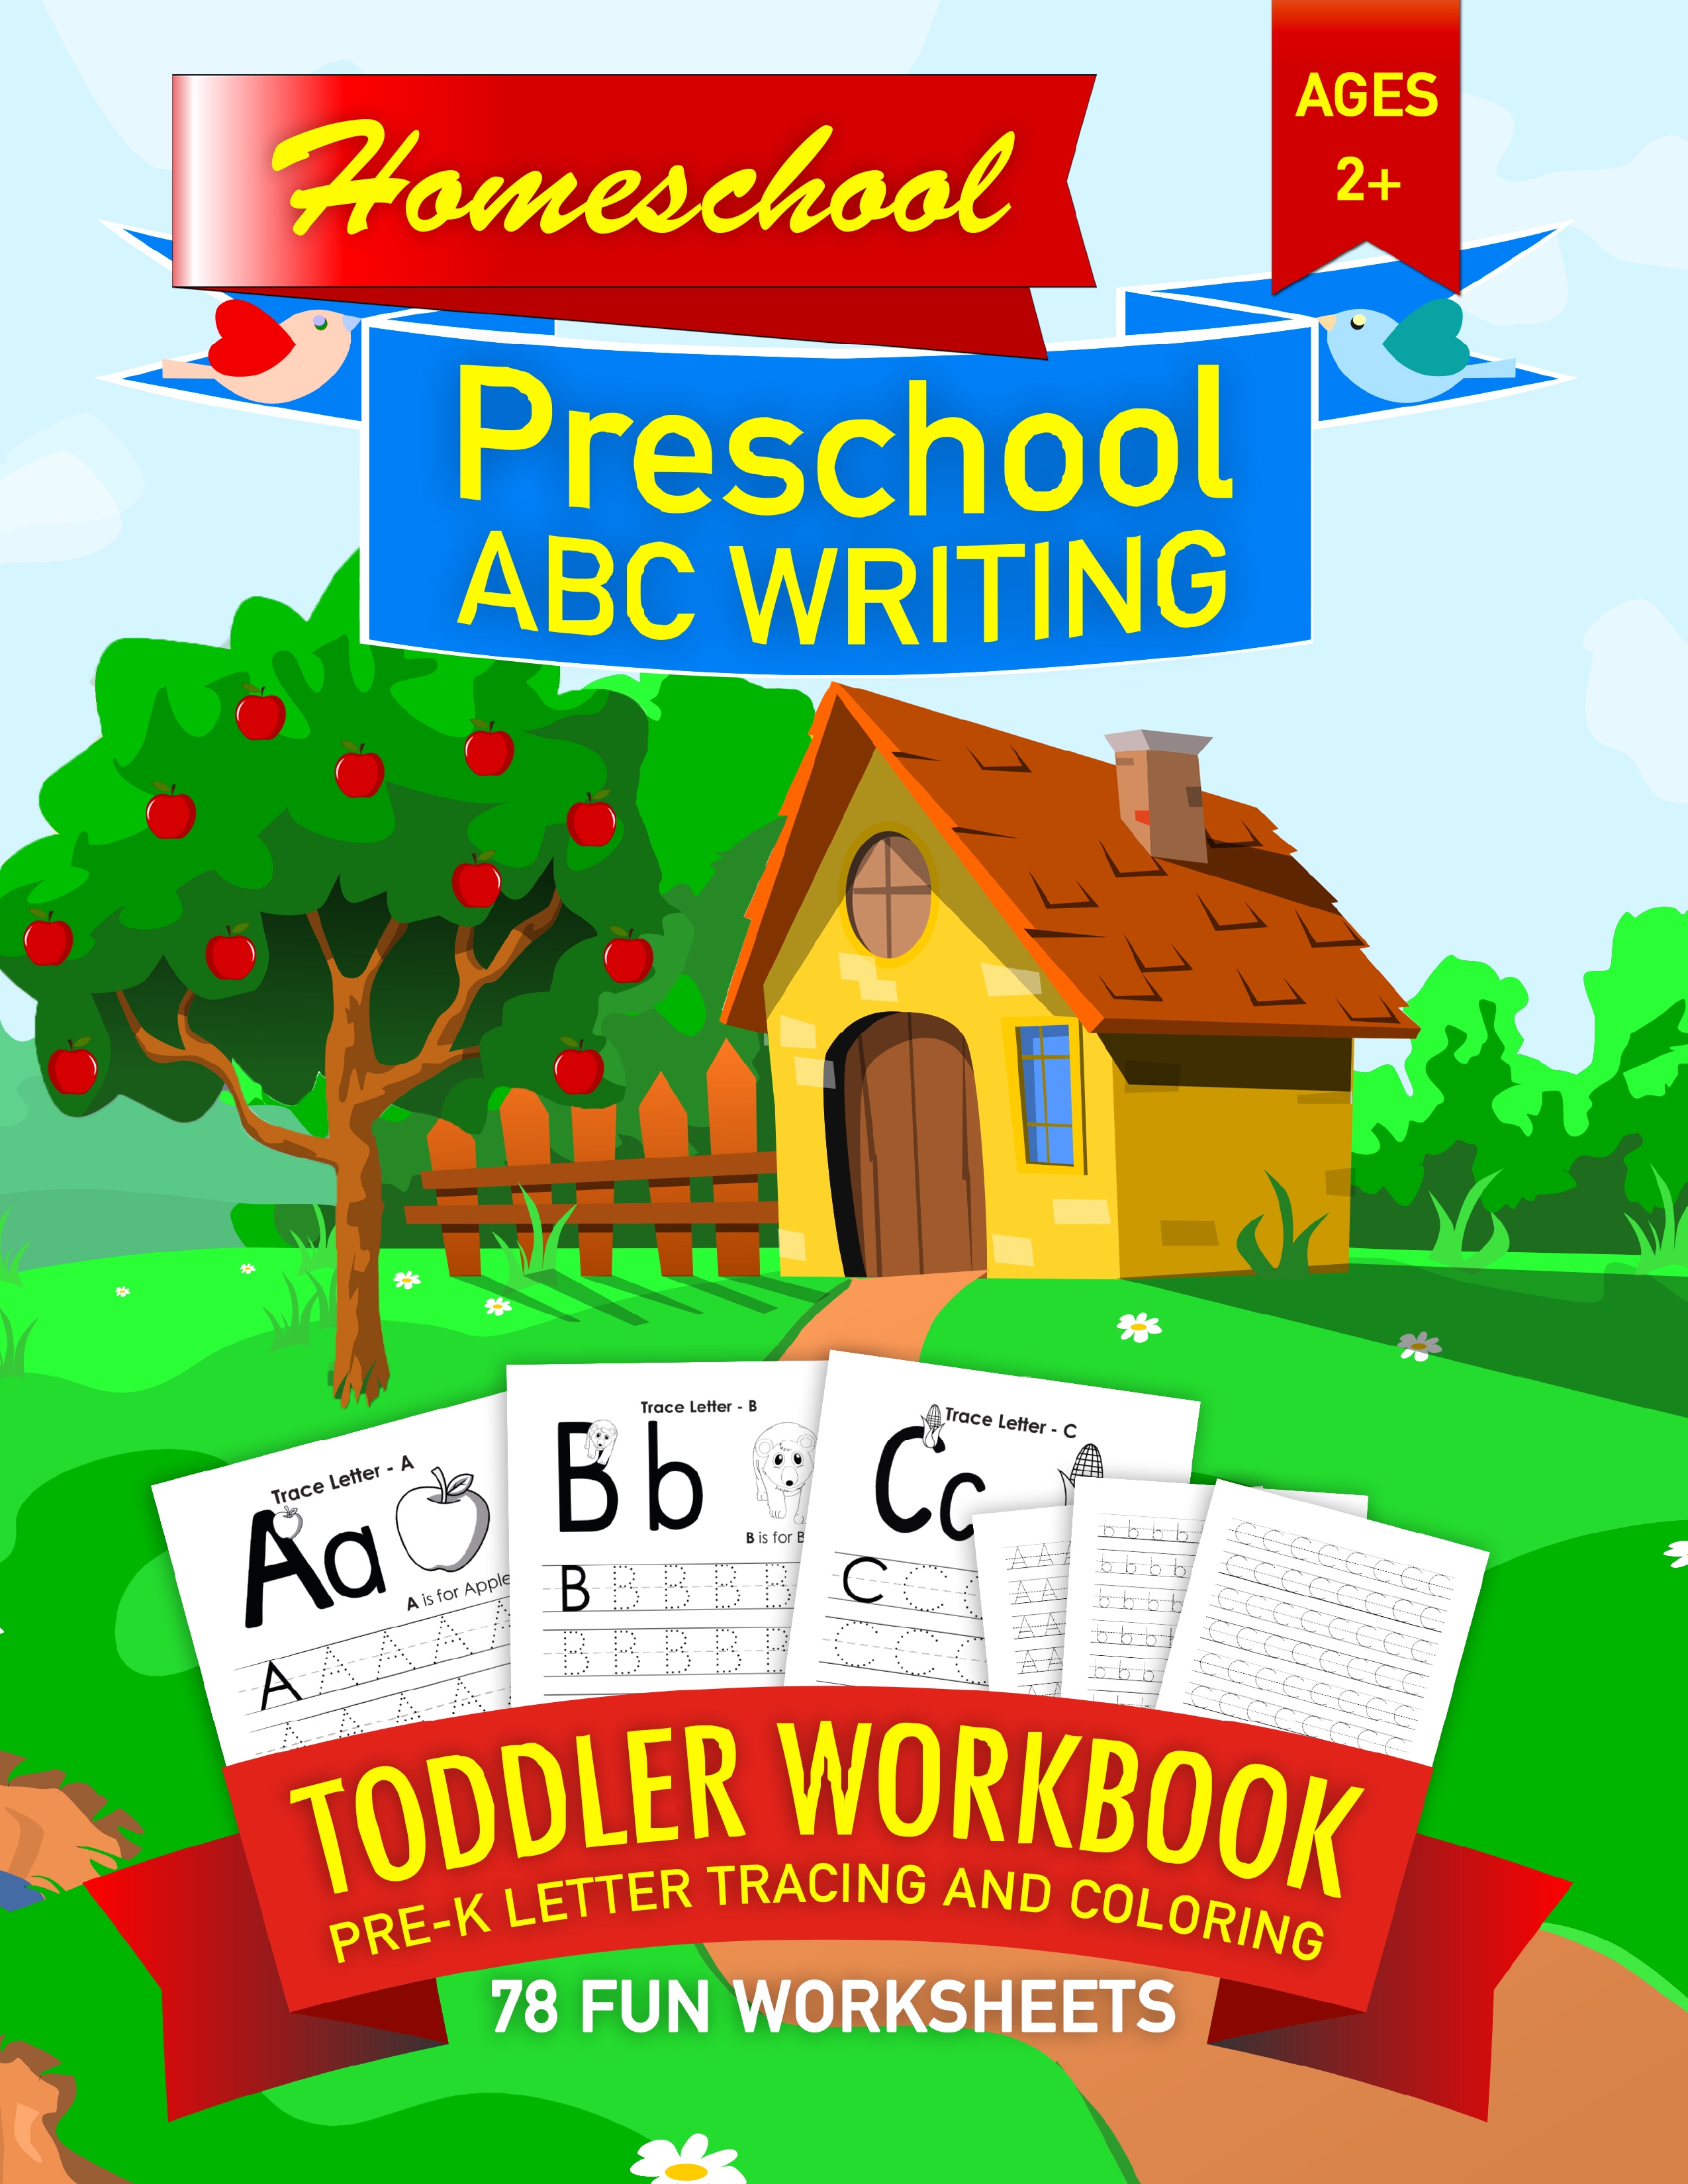 Homeschool Toddler Workbook - Preschool ABC Writing - Pre-K Letter Tracing and Coloring: Beginner Learning Writing Worksheets for School and  Prep Toddler Preschool Workbooks